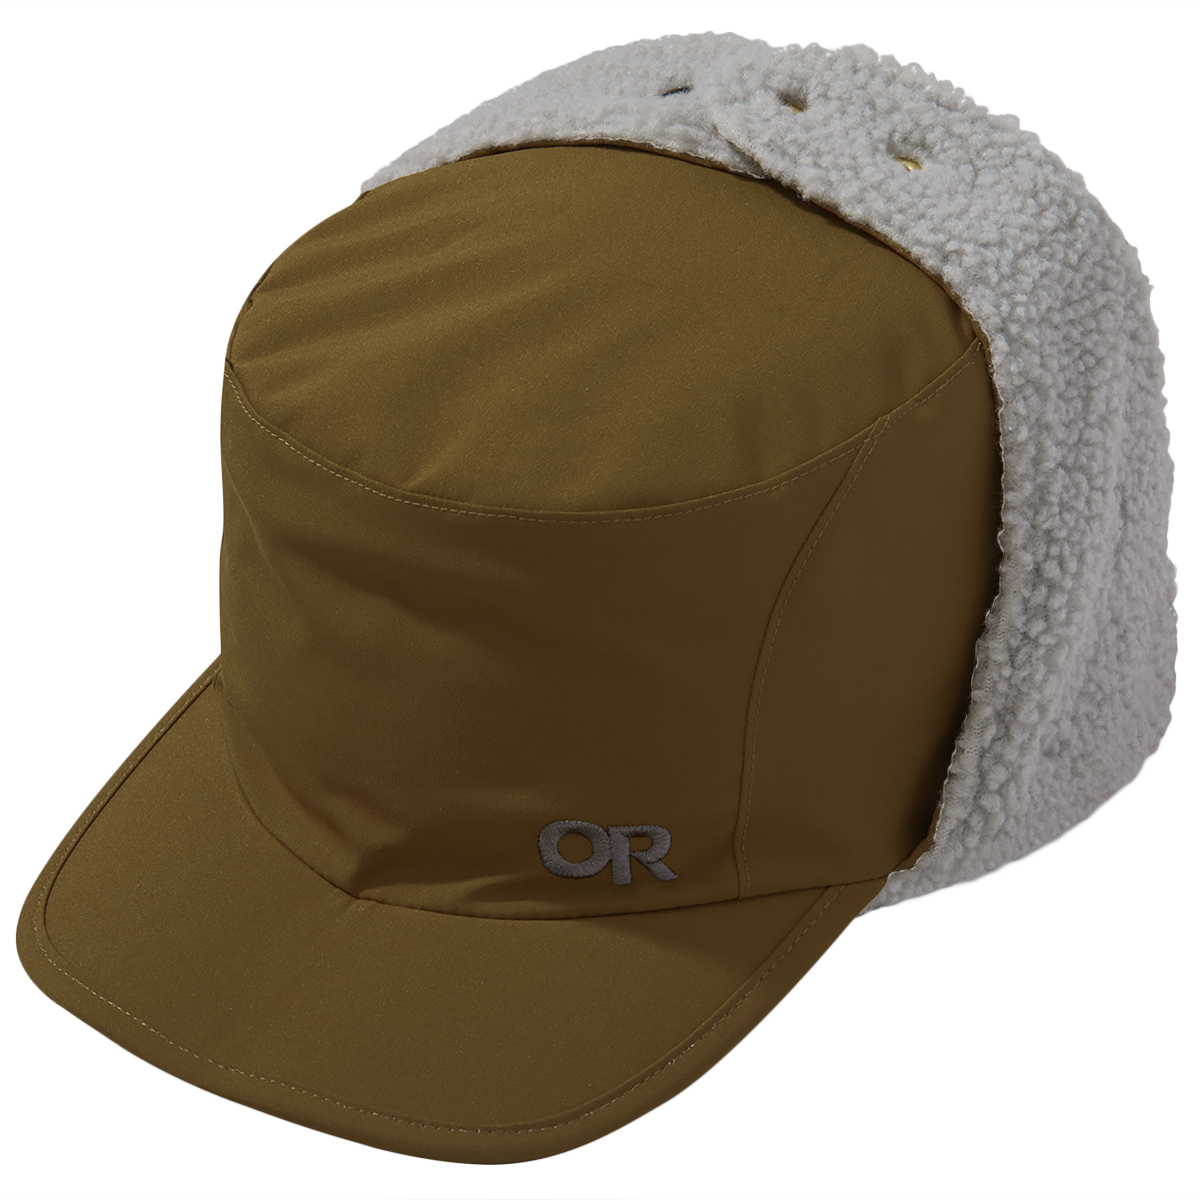 Outdoor Research Men's Whitefish Hat